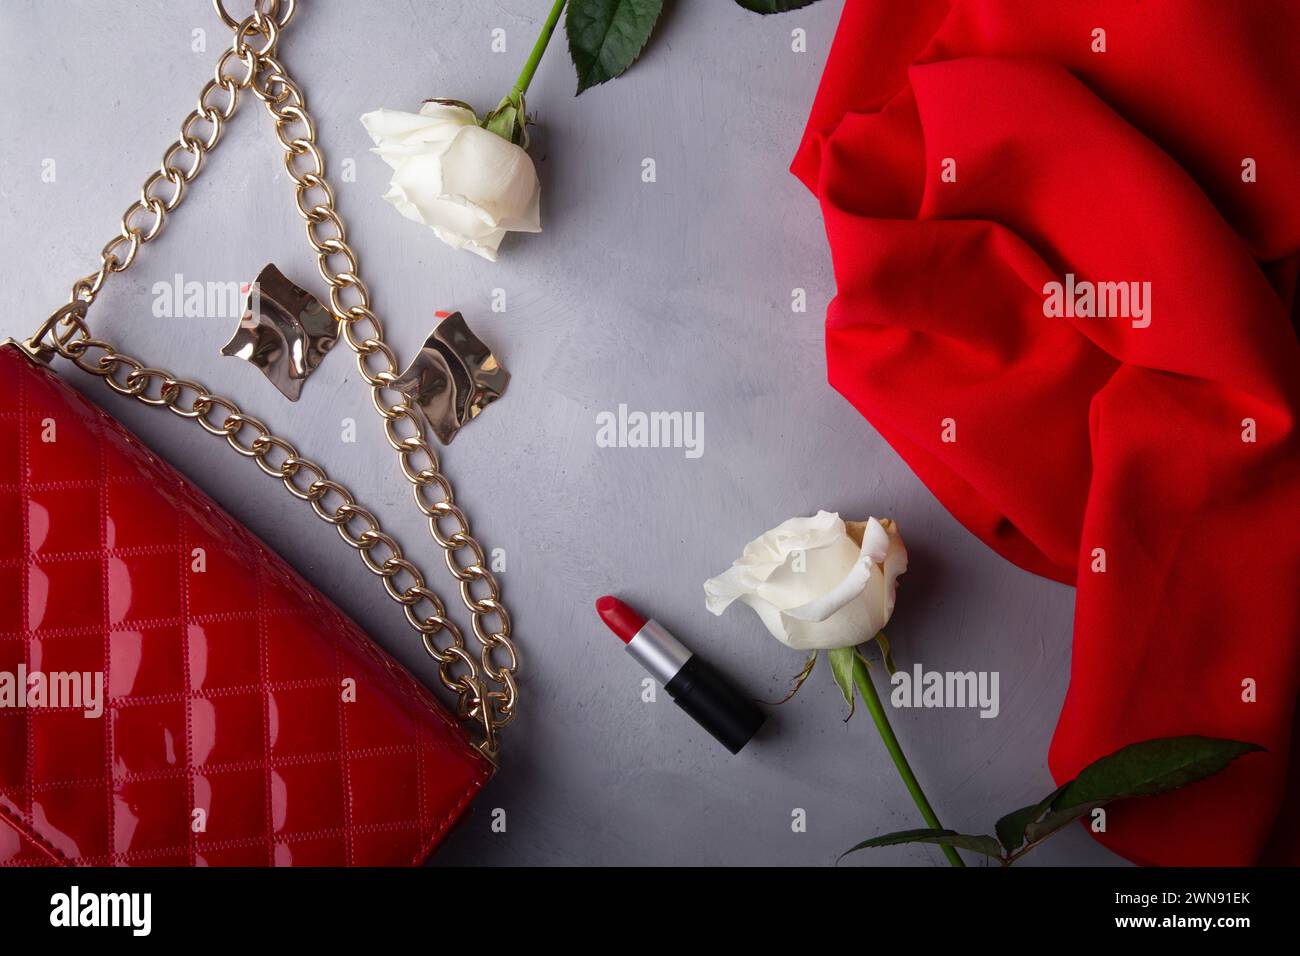 Chic fashion accessories with red purse and classic beauty products among roses. Stock Photo